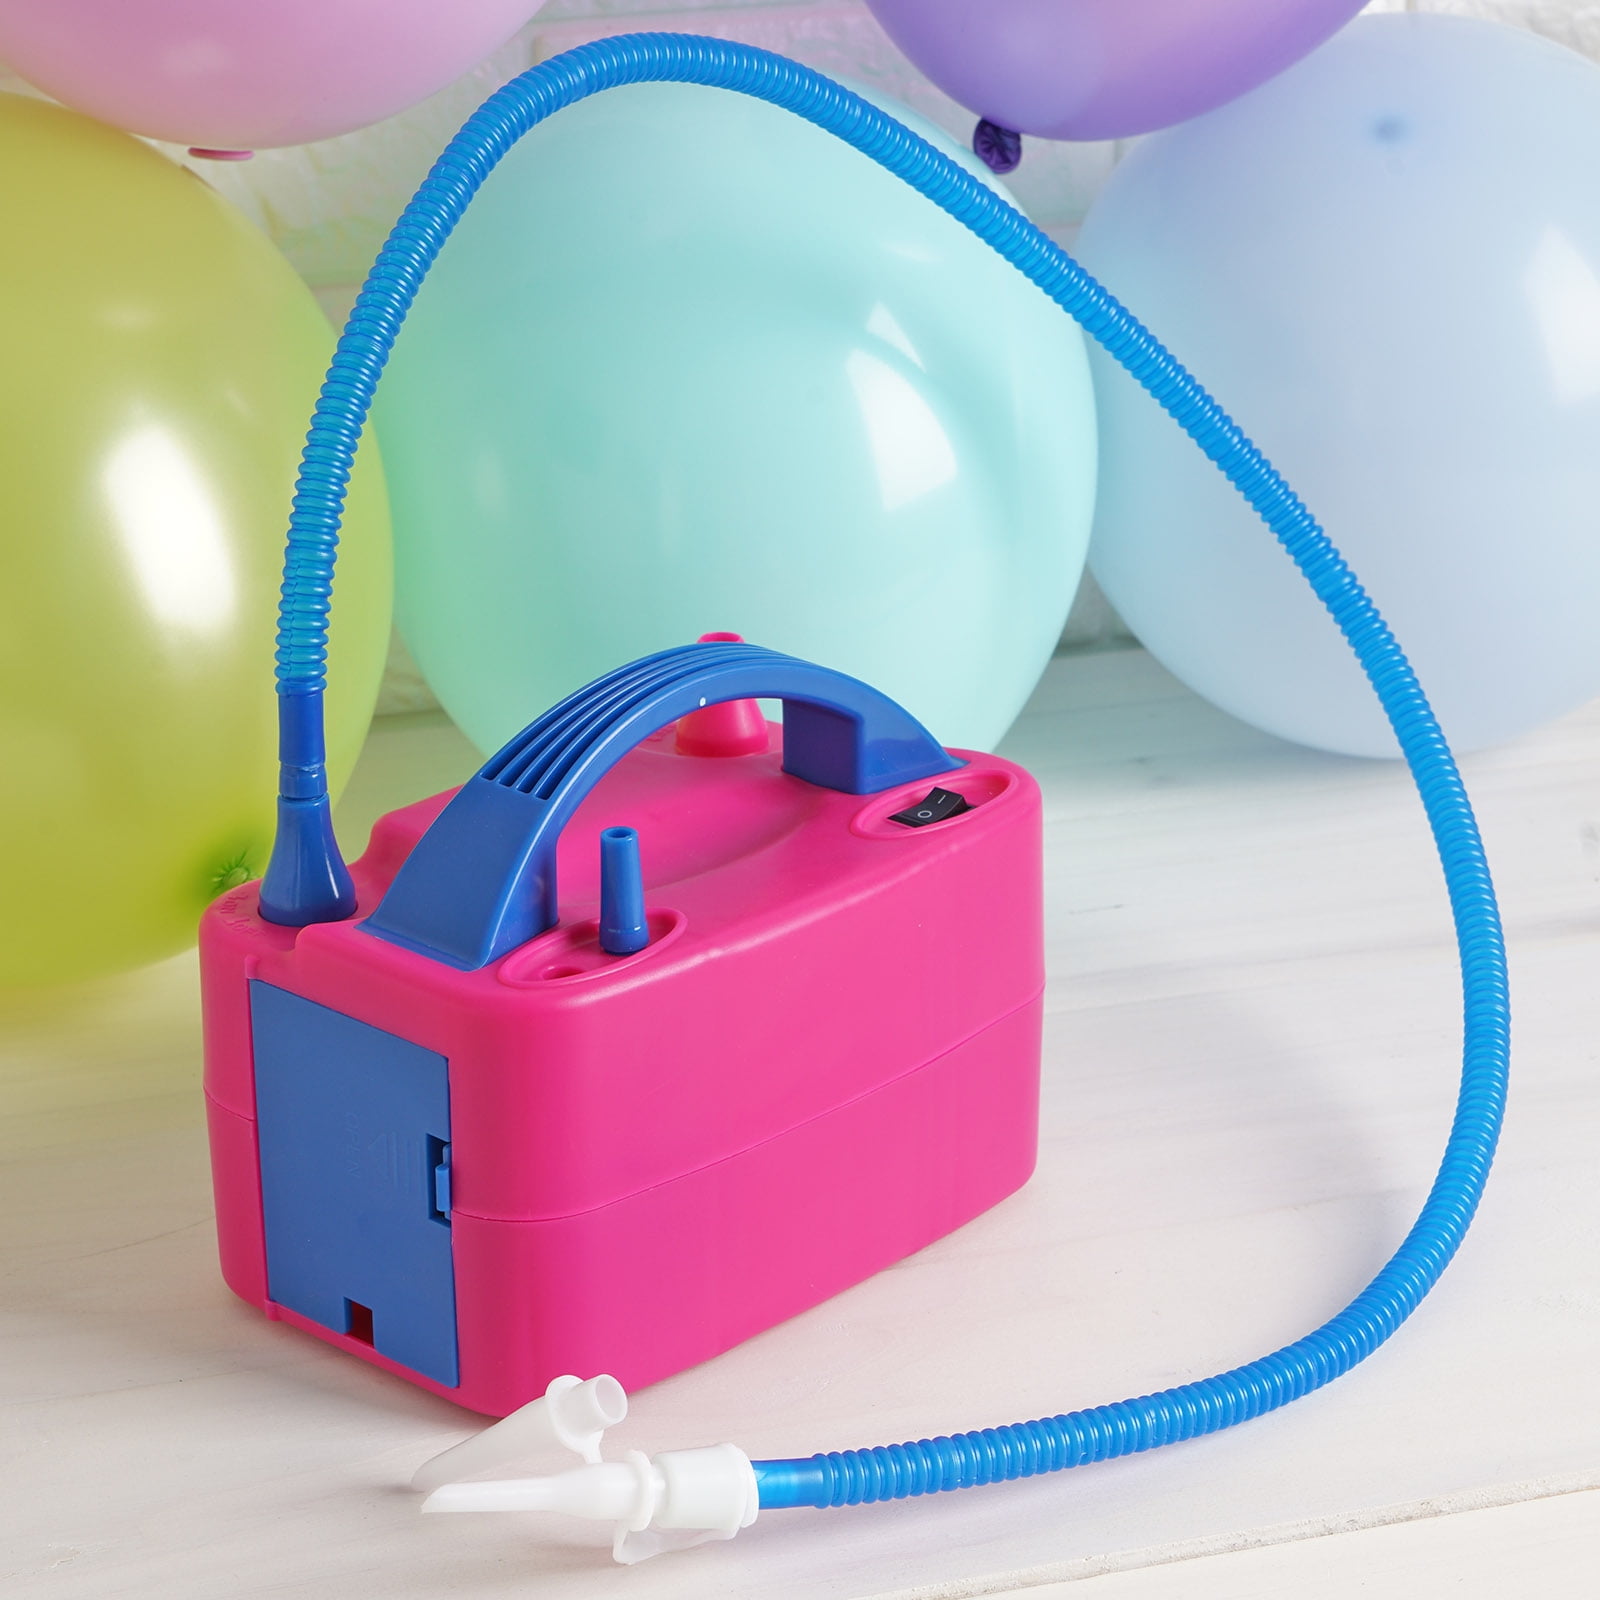 Happy Birthday Party Wedding New Year Electric Inflating Baloons Pump Blower